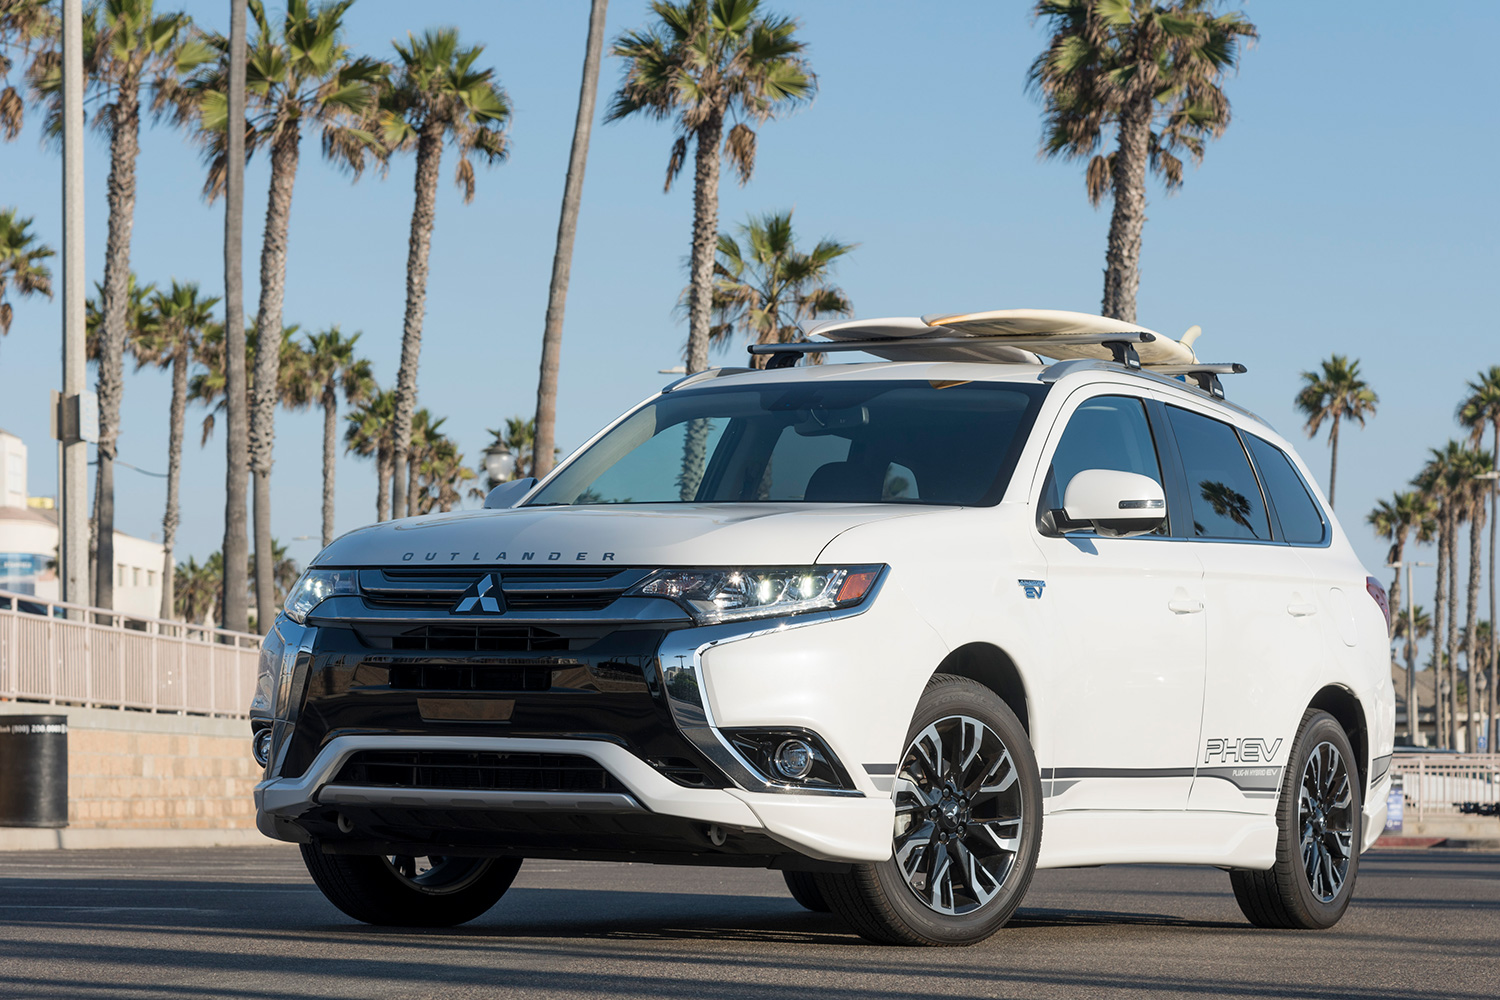 2018 Mitsubishi Outlander PHEV first drive review | Digital Trends